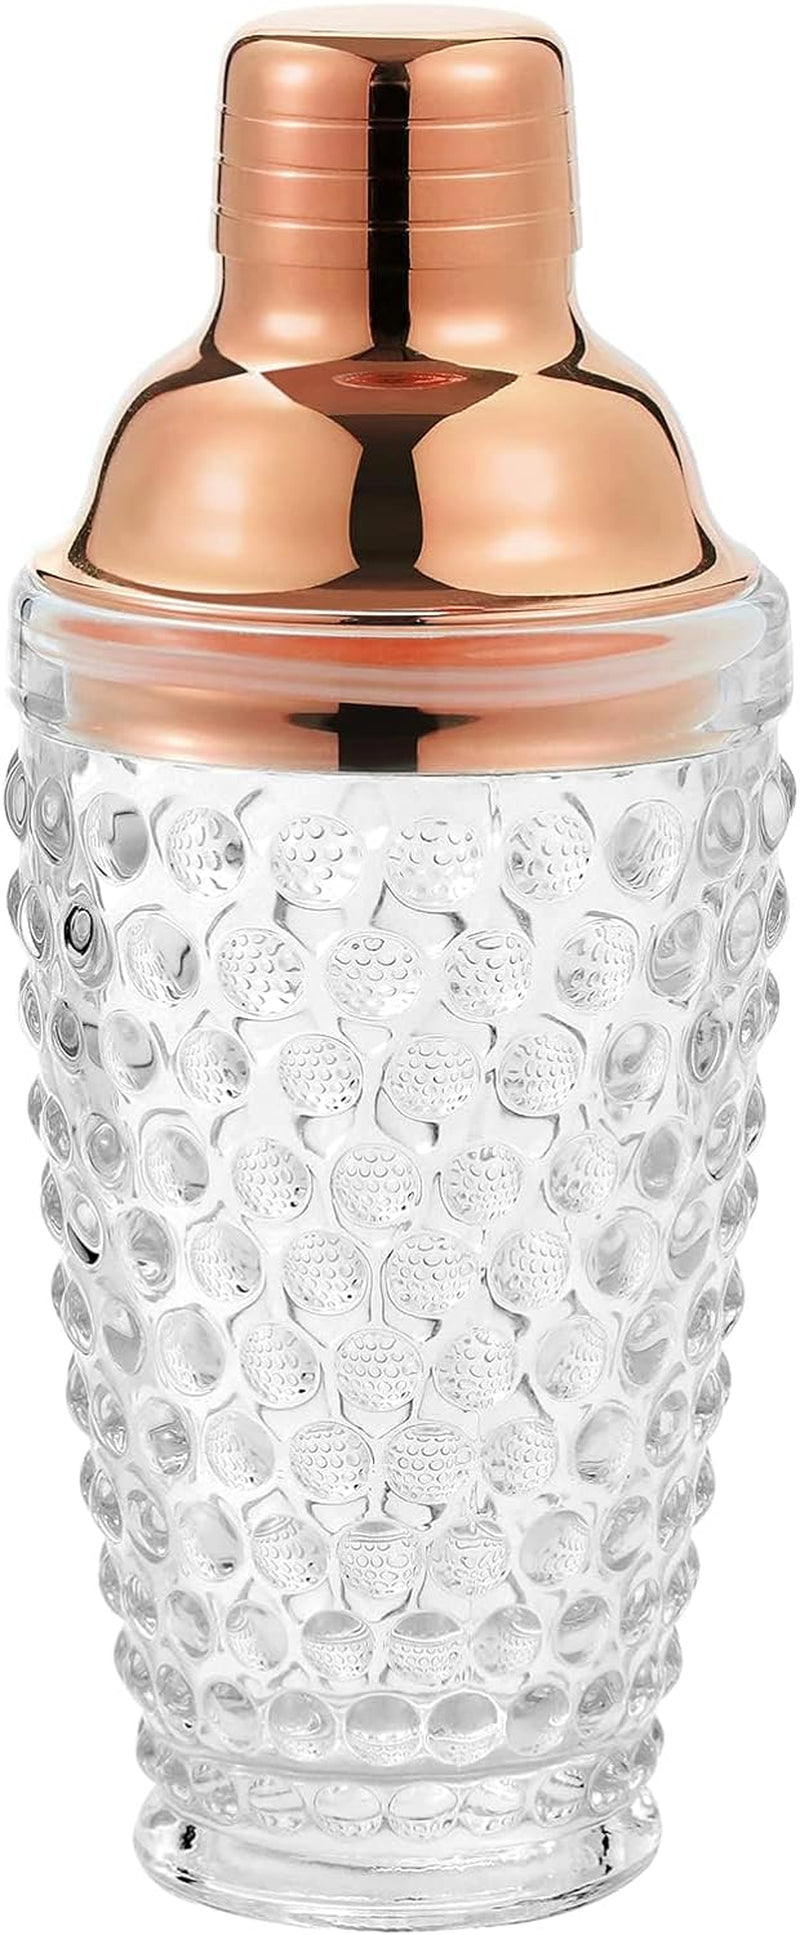 1500° C TABLETOP Hobnail Cocktail Shaker Glass, Martini Shaker, Glass Cocktail Shaker with Strainer, 13.0 oz, Ideal Gift for Women, Beginners and Bartenders(Gold)